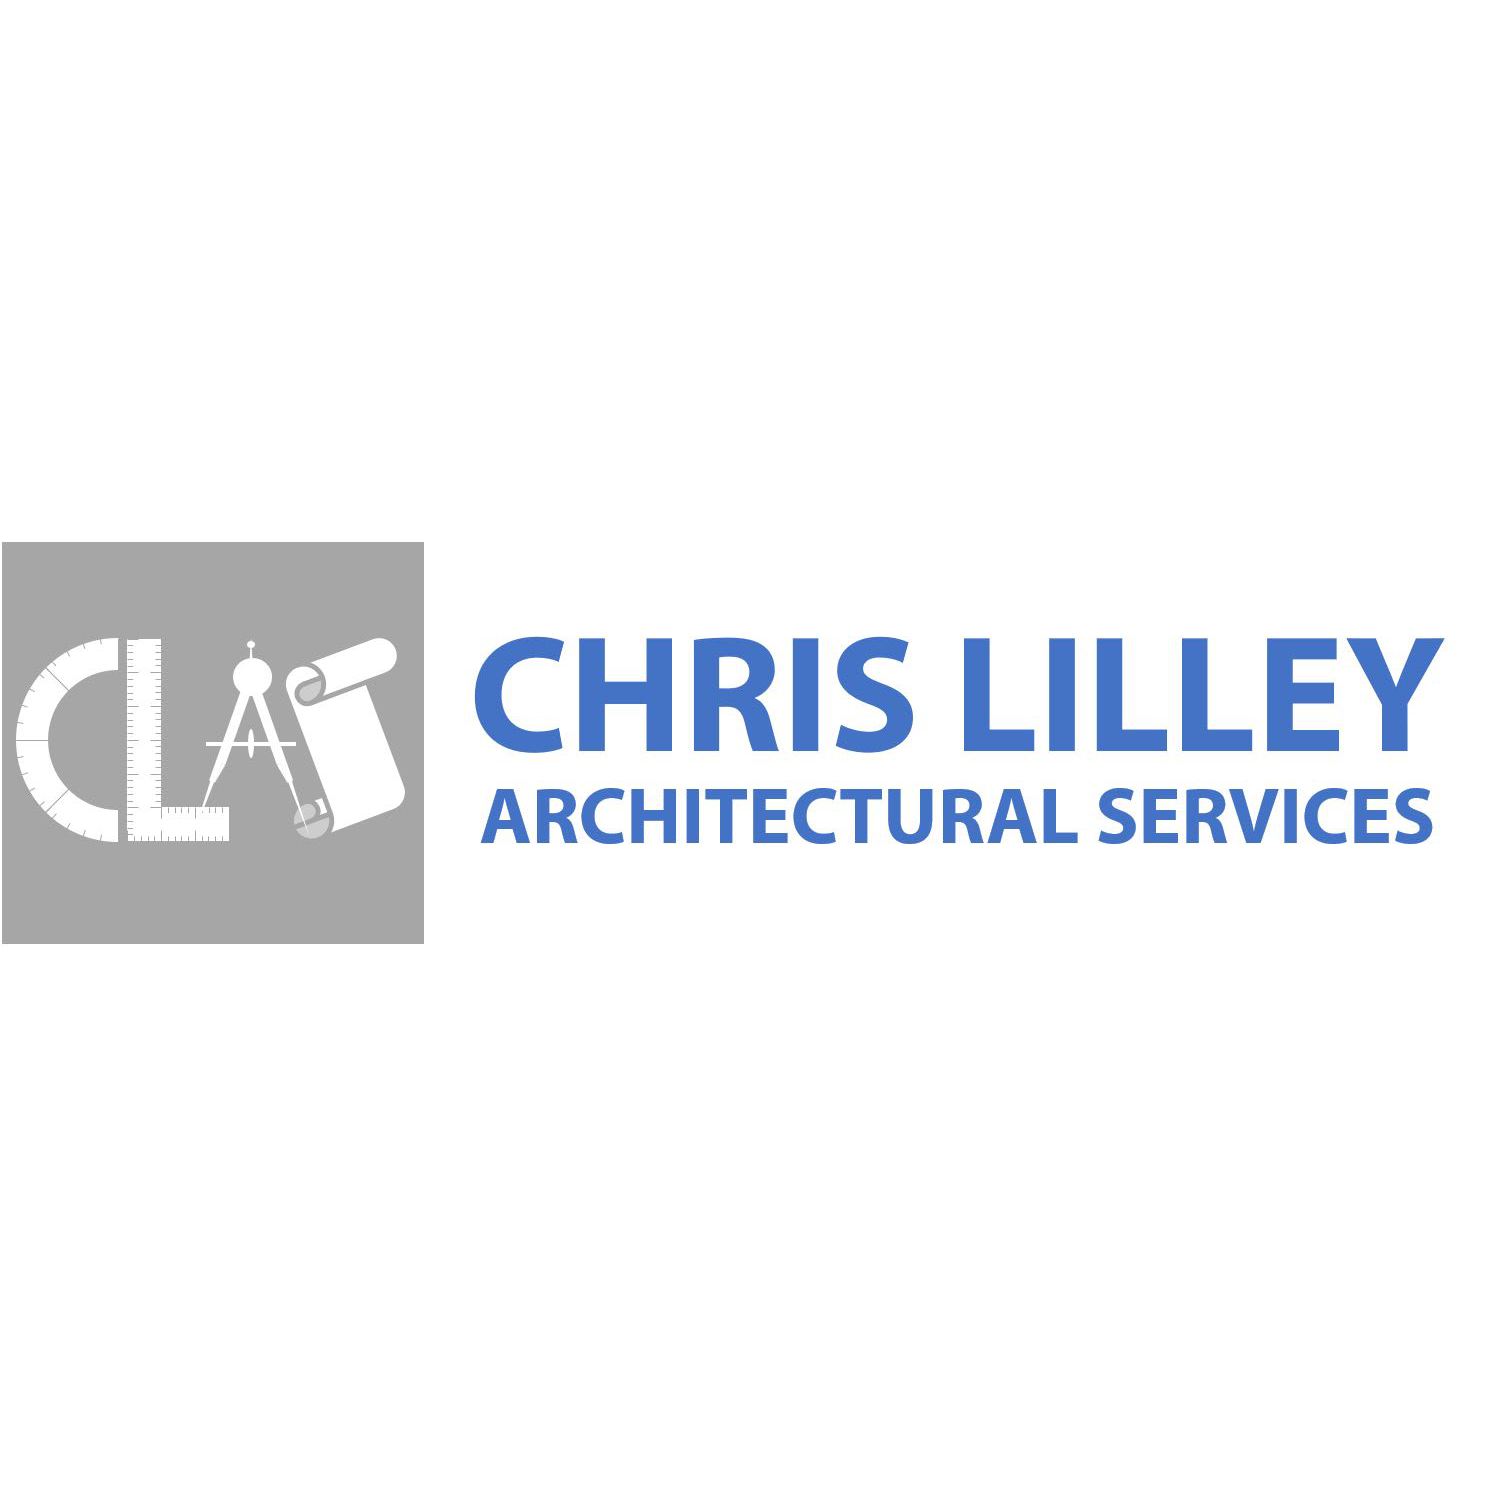 Chris Lilley Architectural Services - Sleaford, Lincolnshire NG34 7HQ - 07738 302711 | ShowMeLocal.com